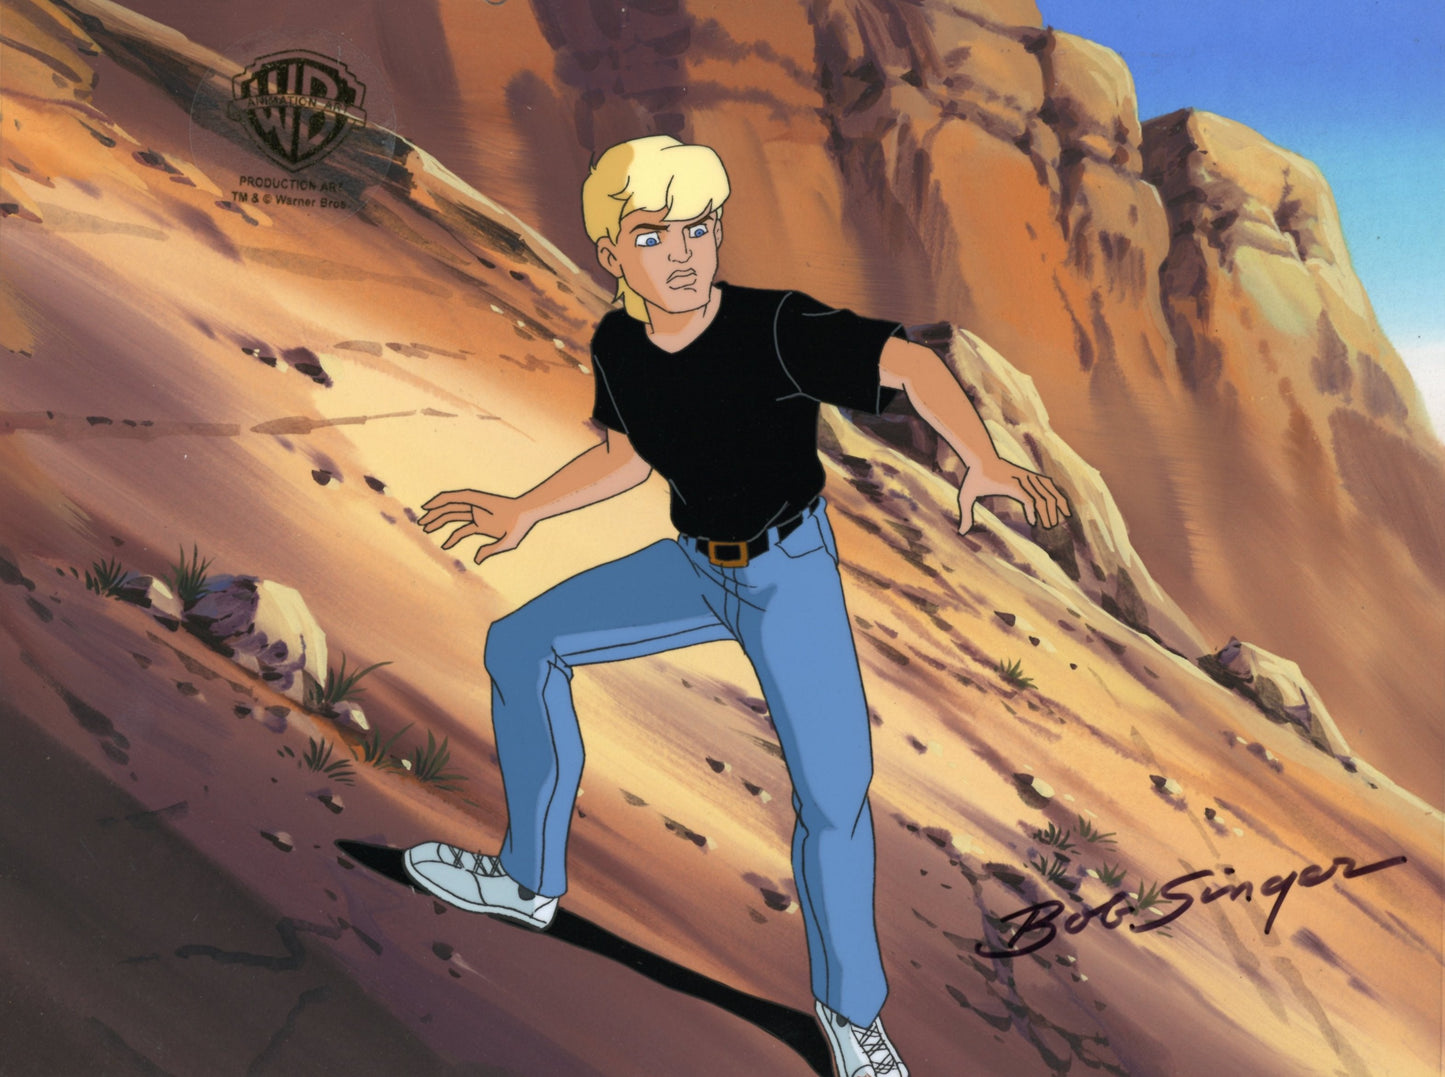 The Real Adventures of Jonny Quest Original Production Cel with Original Background Signed by Bob Singer: Jonny